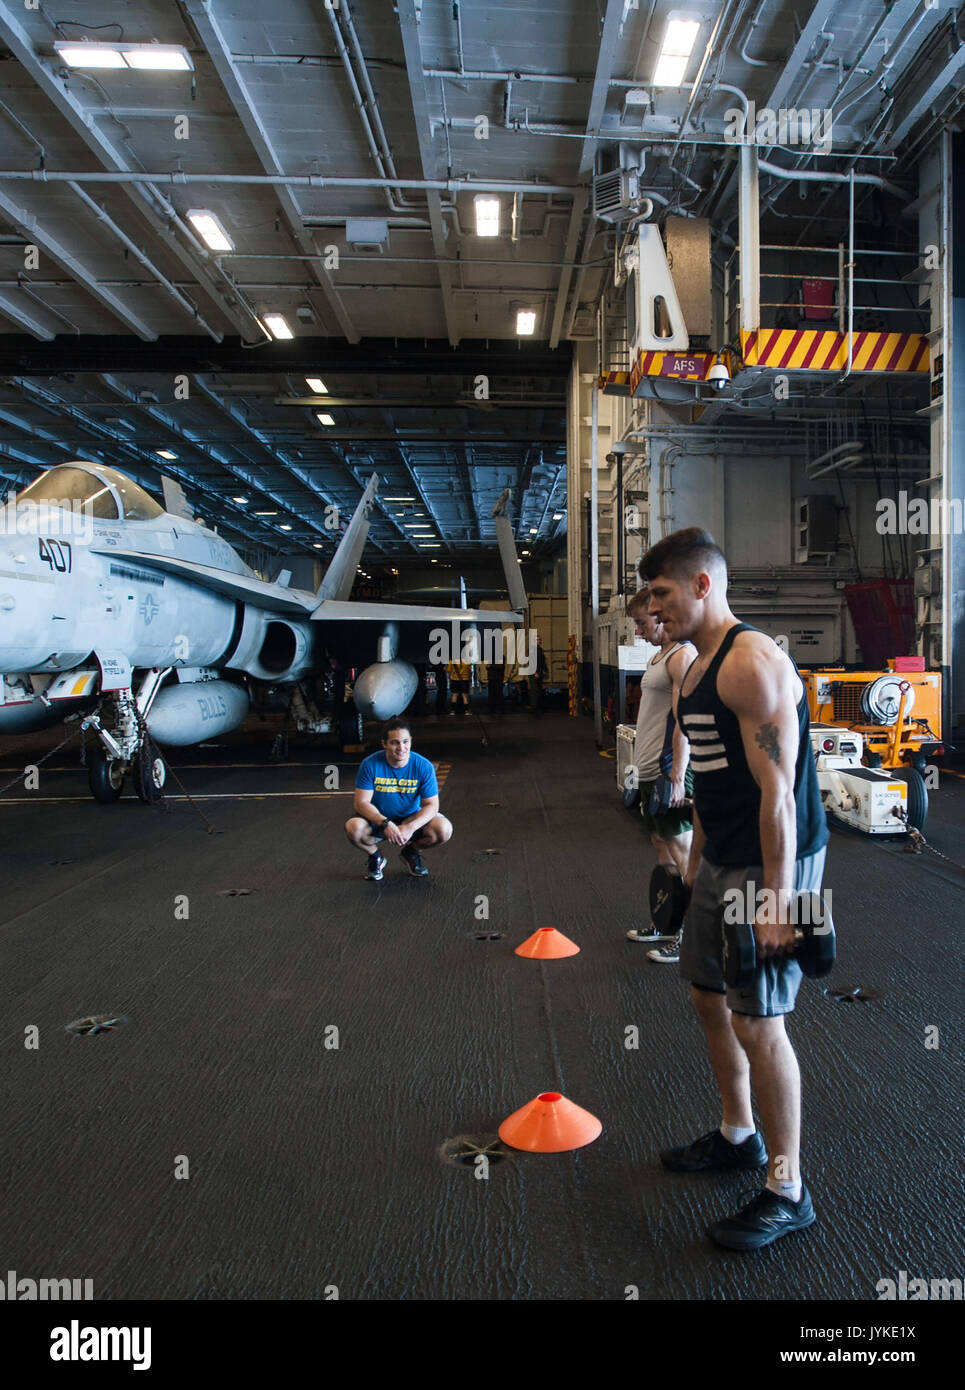 170815-N-RZ514-042 ATLANTIC OCEAN (Aug. 15, 2017) 'Fit Boss' Justin Vigil, left, hosts a 'Battle for the Dumbbell' competition in the hangar bay aboard the aircraft carrier USS George H.W. Bush (CVN 77). The ship and its carrier strike group are conducting naval operations in the U.S. 6th Fleet area of operations in support of U.S. national security interests.  (U.S. Navy photo by Mass Communication Specialist Seaman Jennifer M. Kirkman/Released) Stock Photo